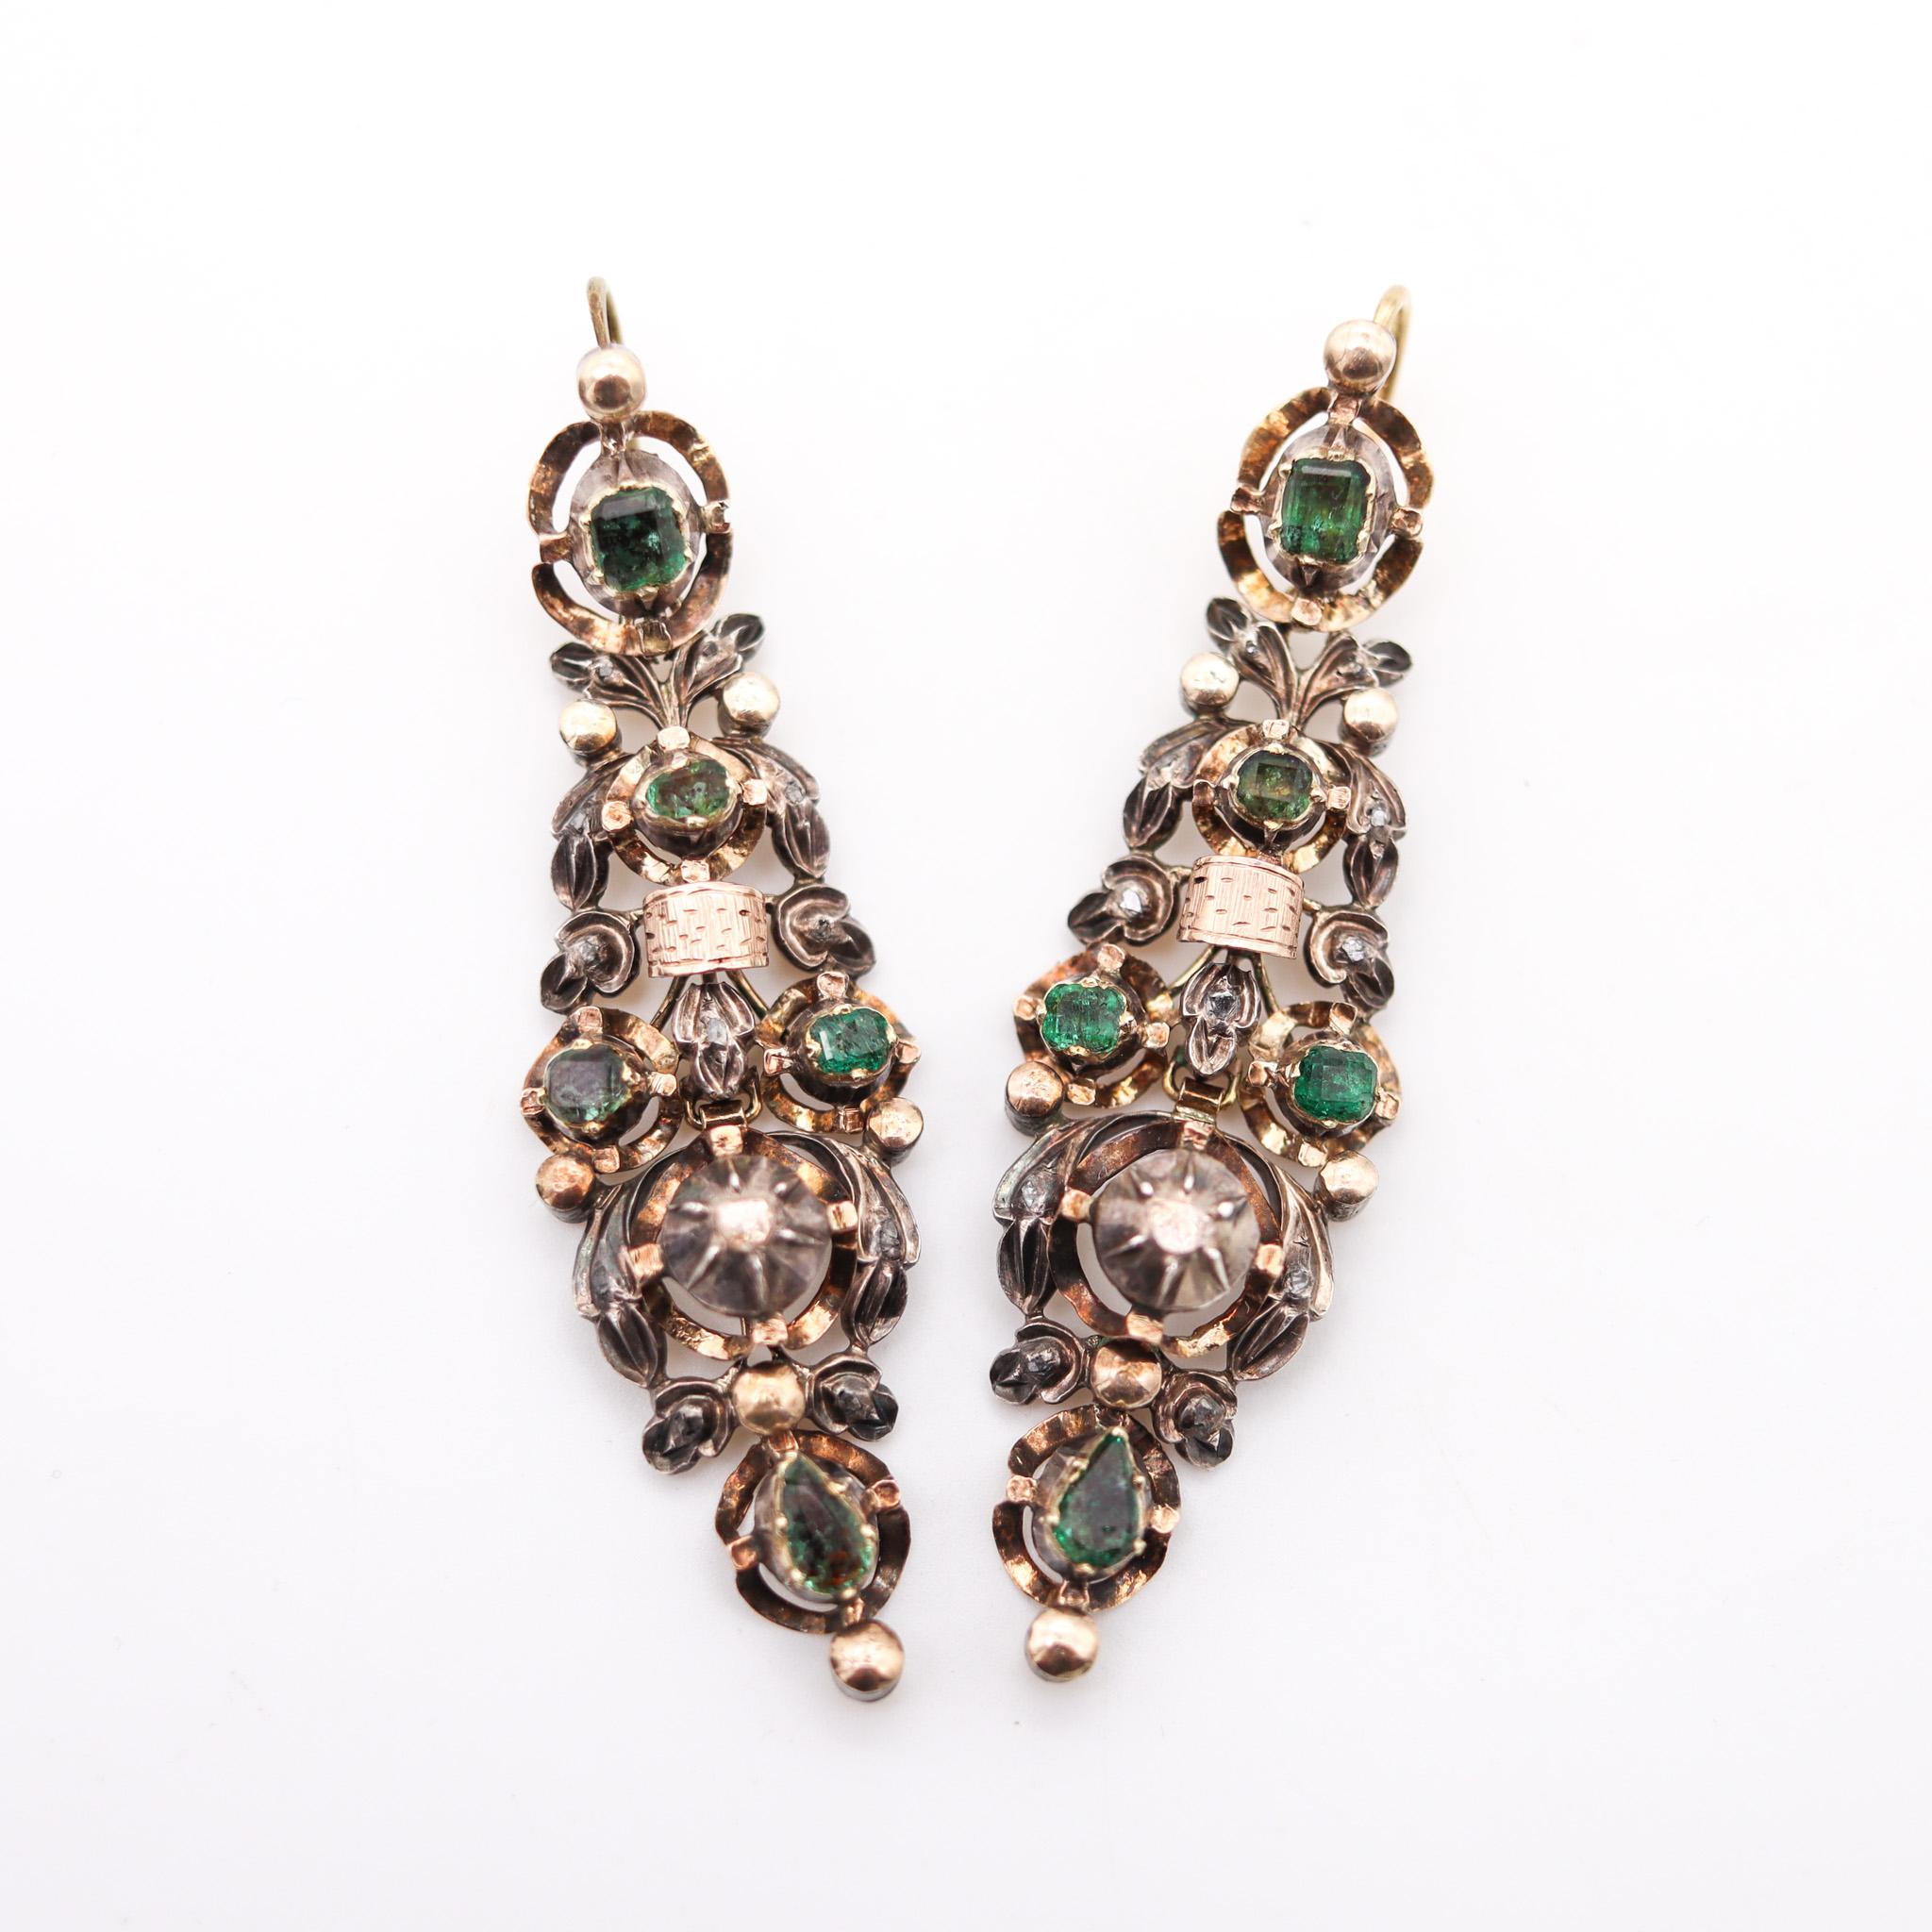 Spanish Colonial antique dangle Iberian earrings.

Exceptionally rare antique pair created in Spain during the Spanish Colonial period, circa 1785. We are sure these dangle drop earrings were made in the Spanish Colombia and most probably in the